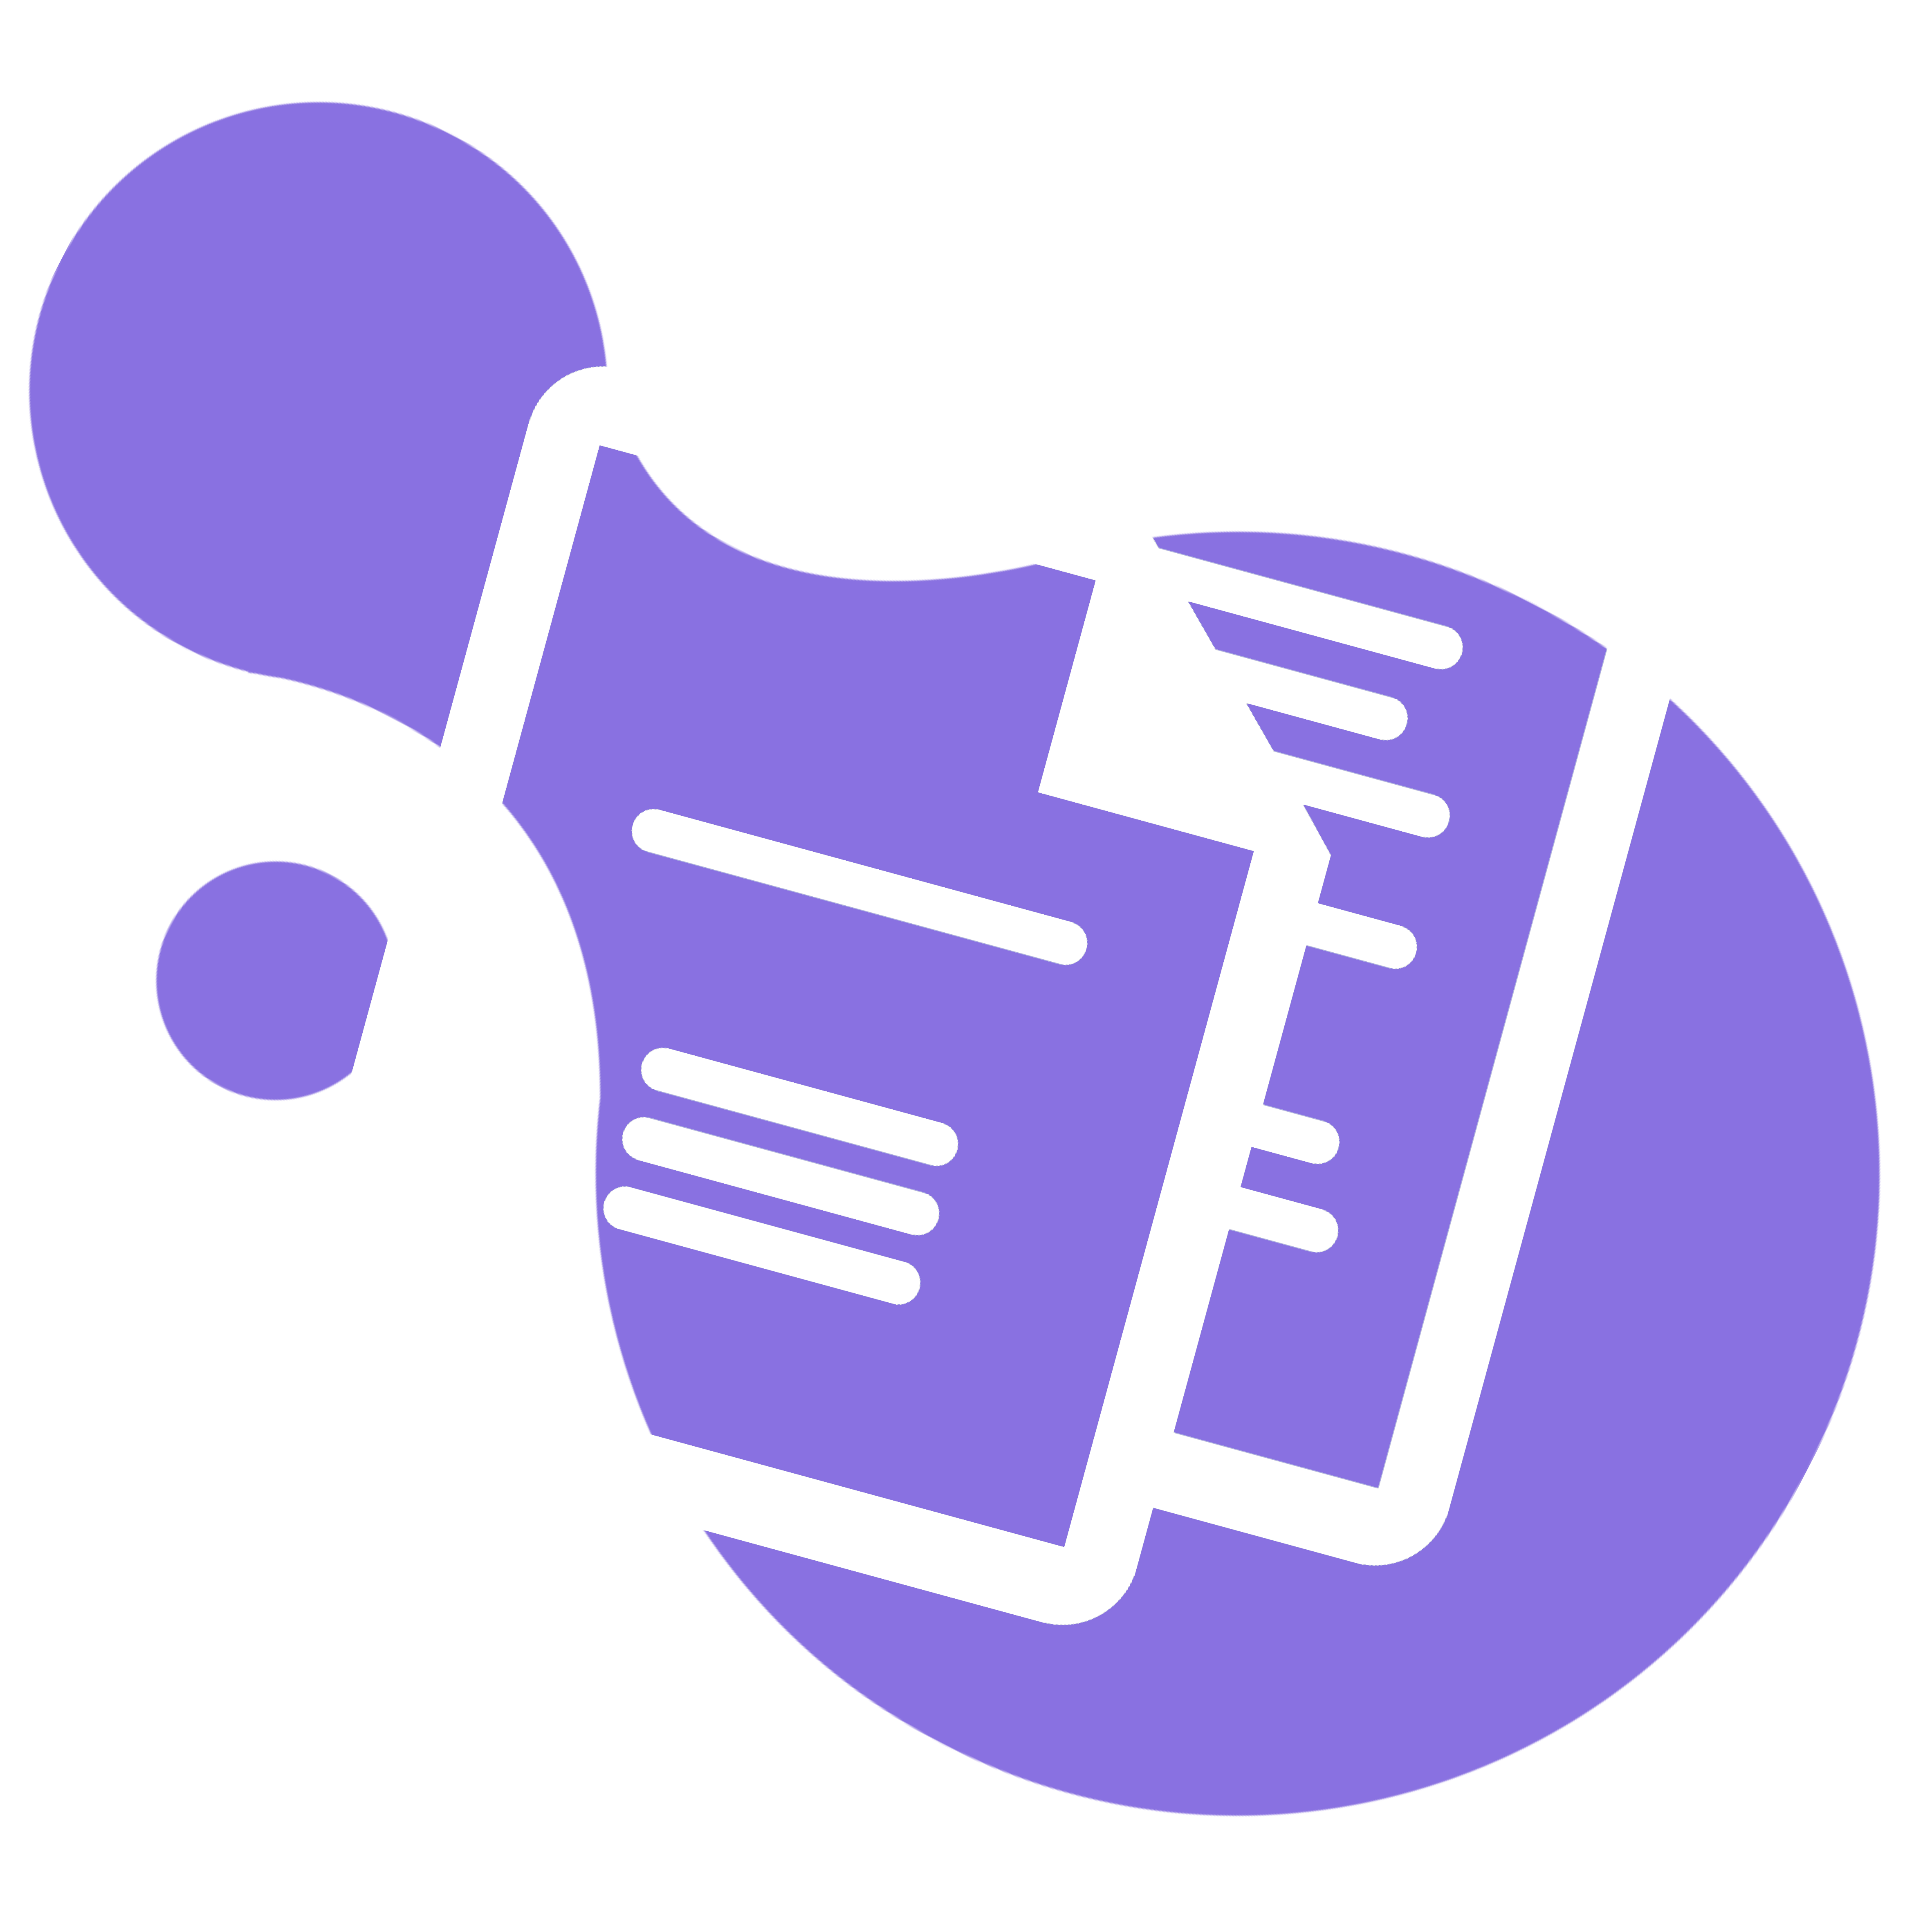 A purple blob with an overlay of a document icon in white